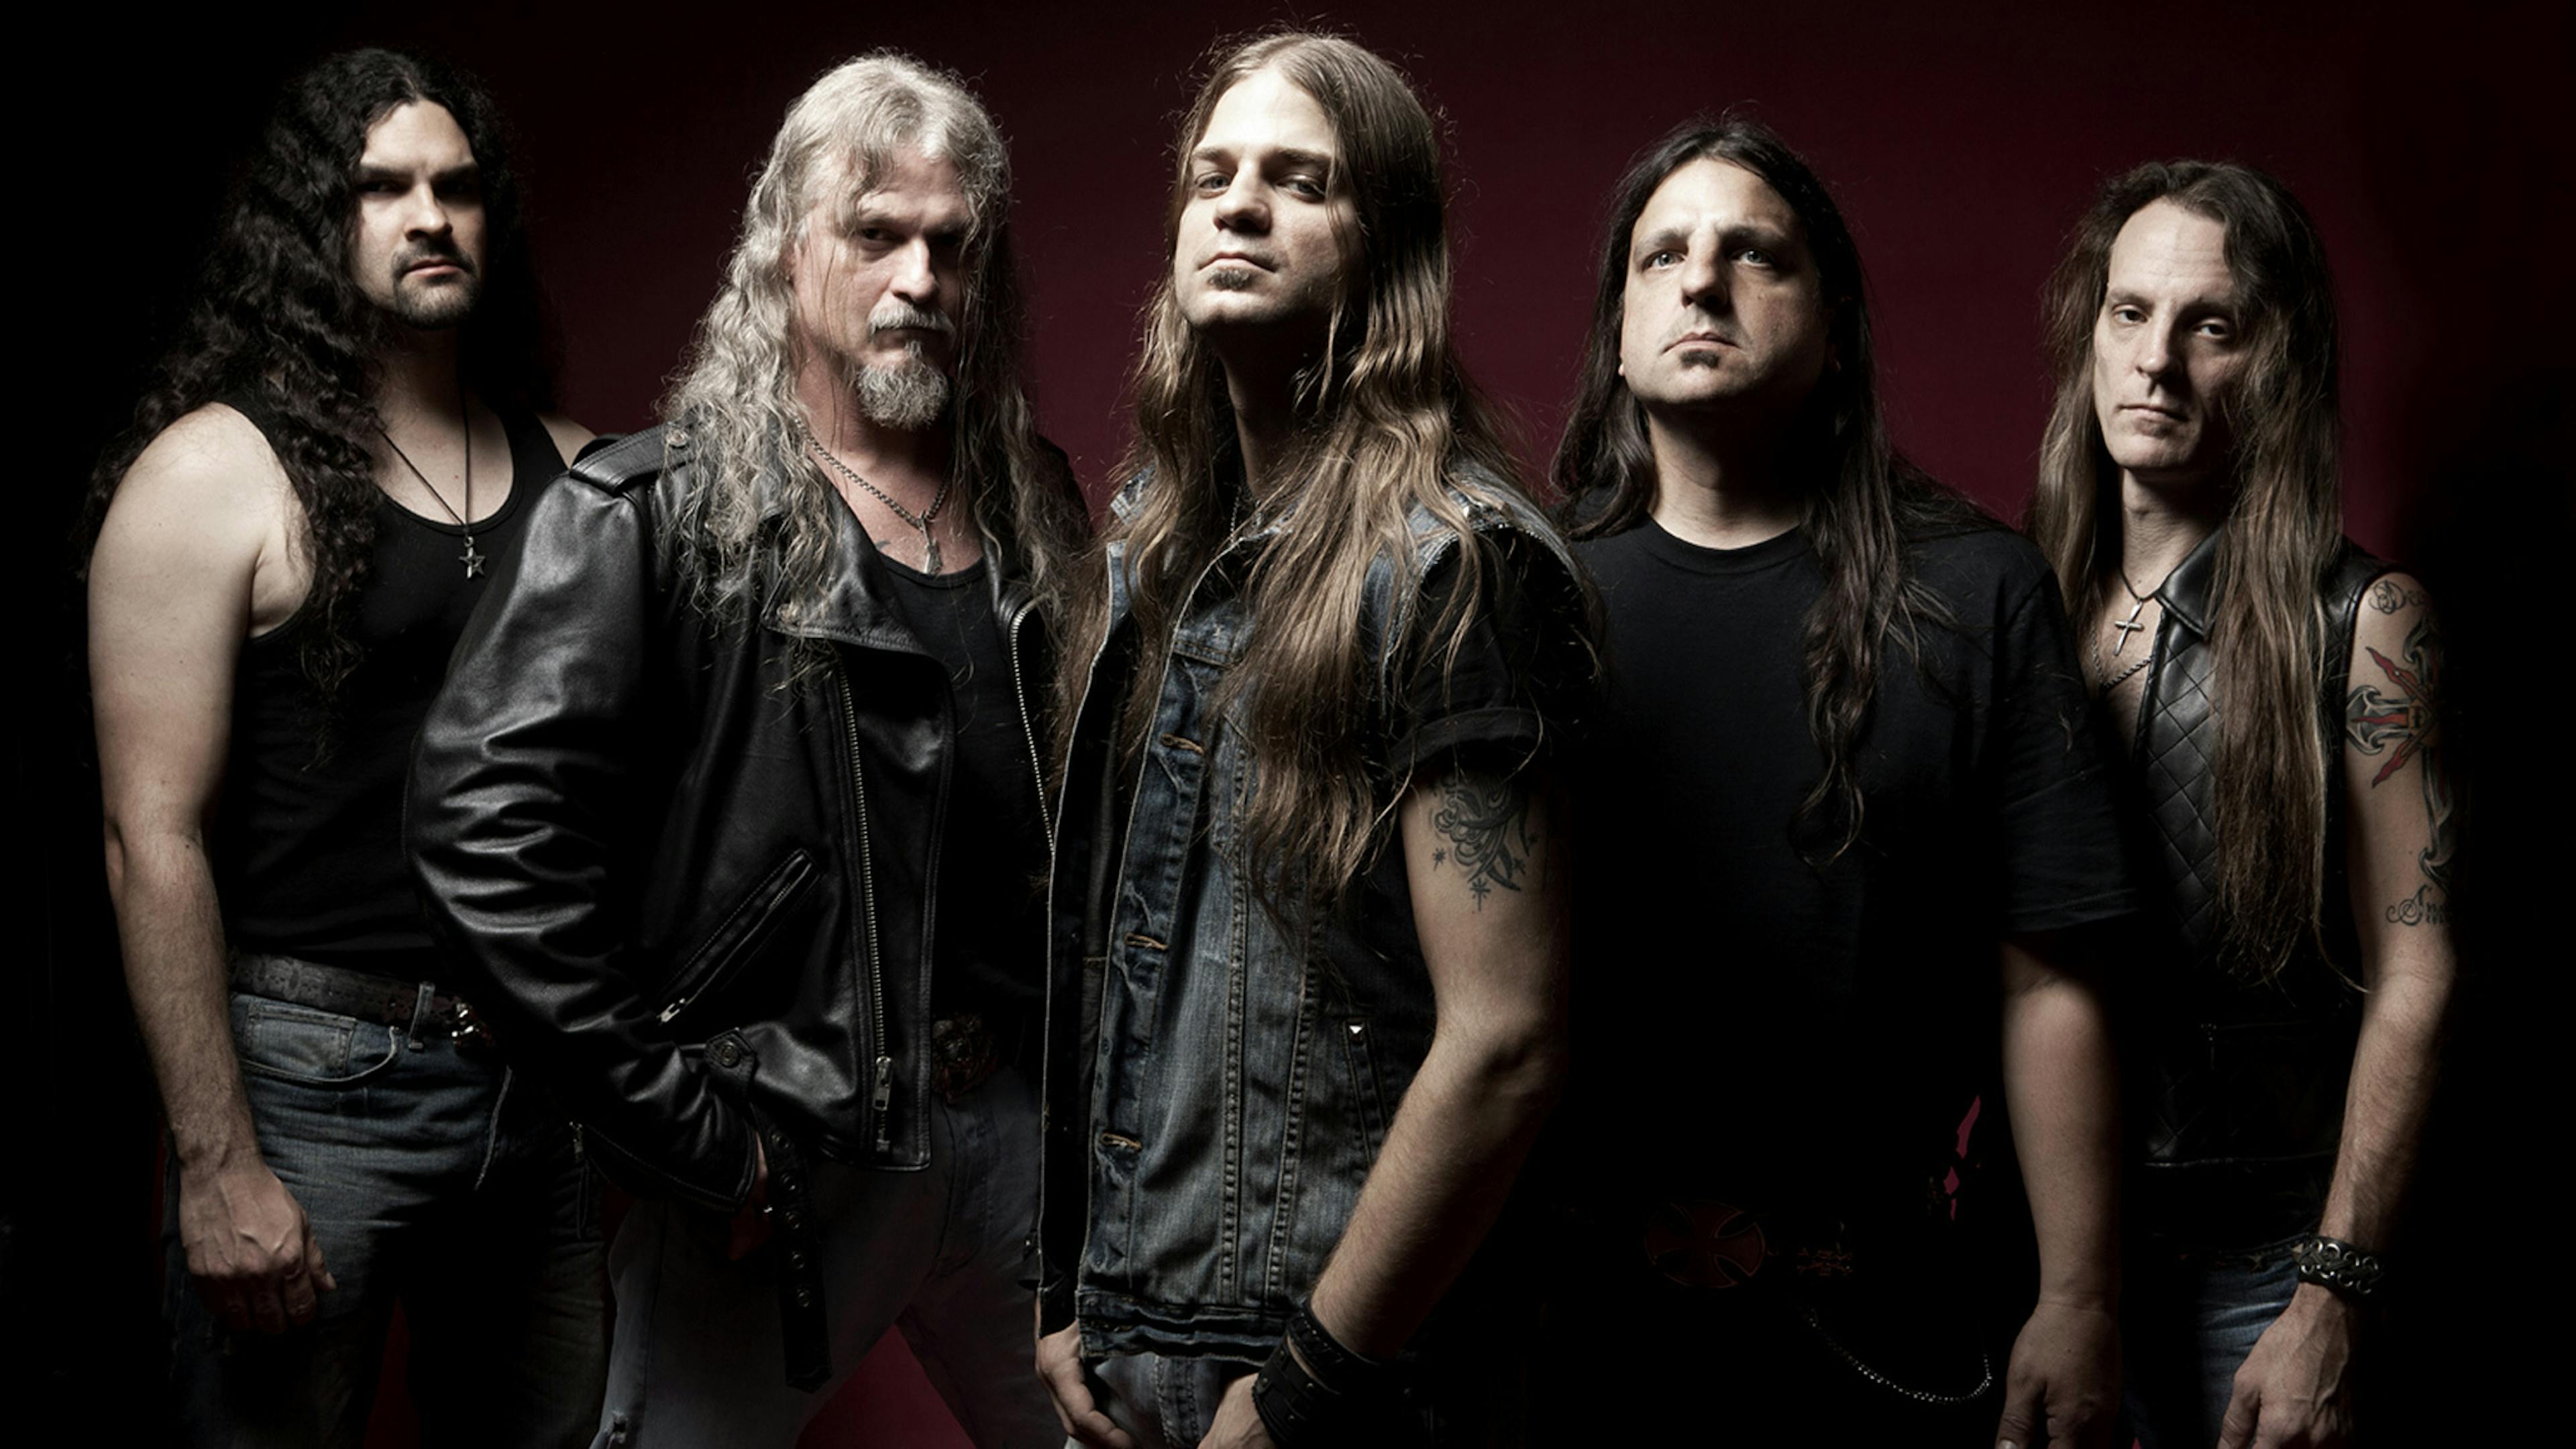 Iced Earth's vocalist and bassist have left the band